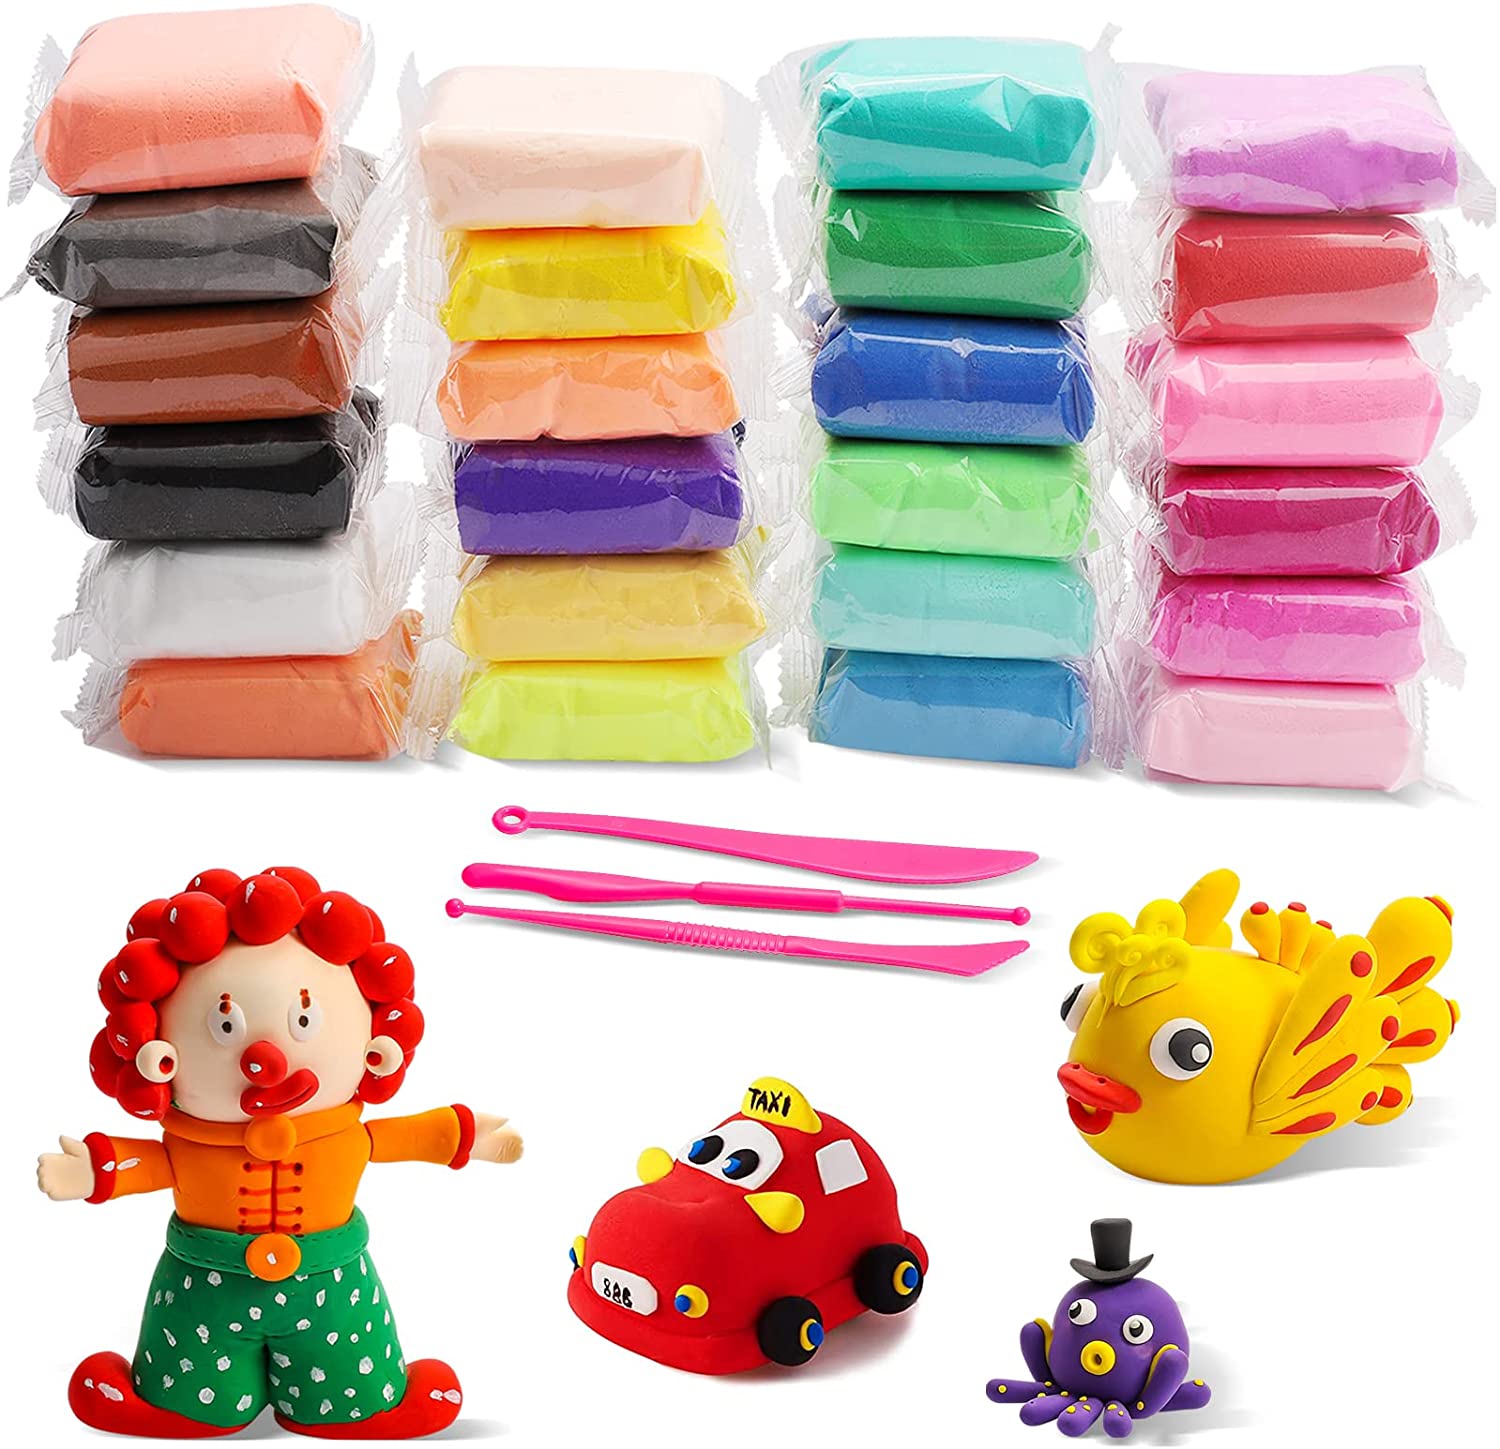 Air Dry Clay for Kids 24 Colors, PIERPIER Magic Modeling Clay Kit